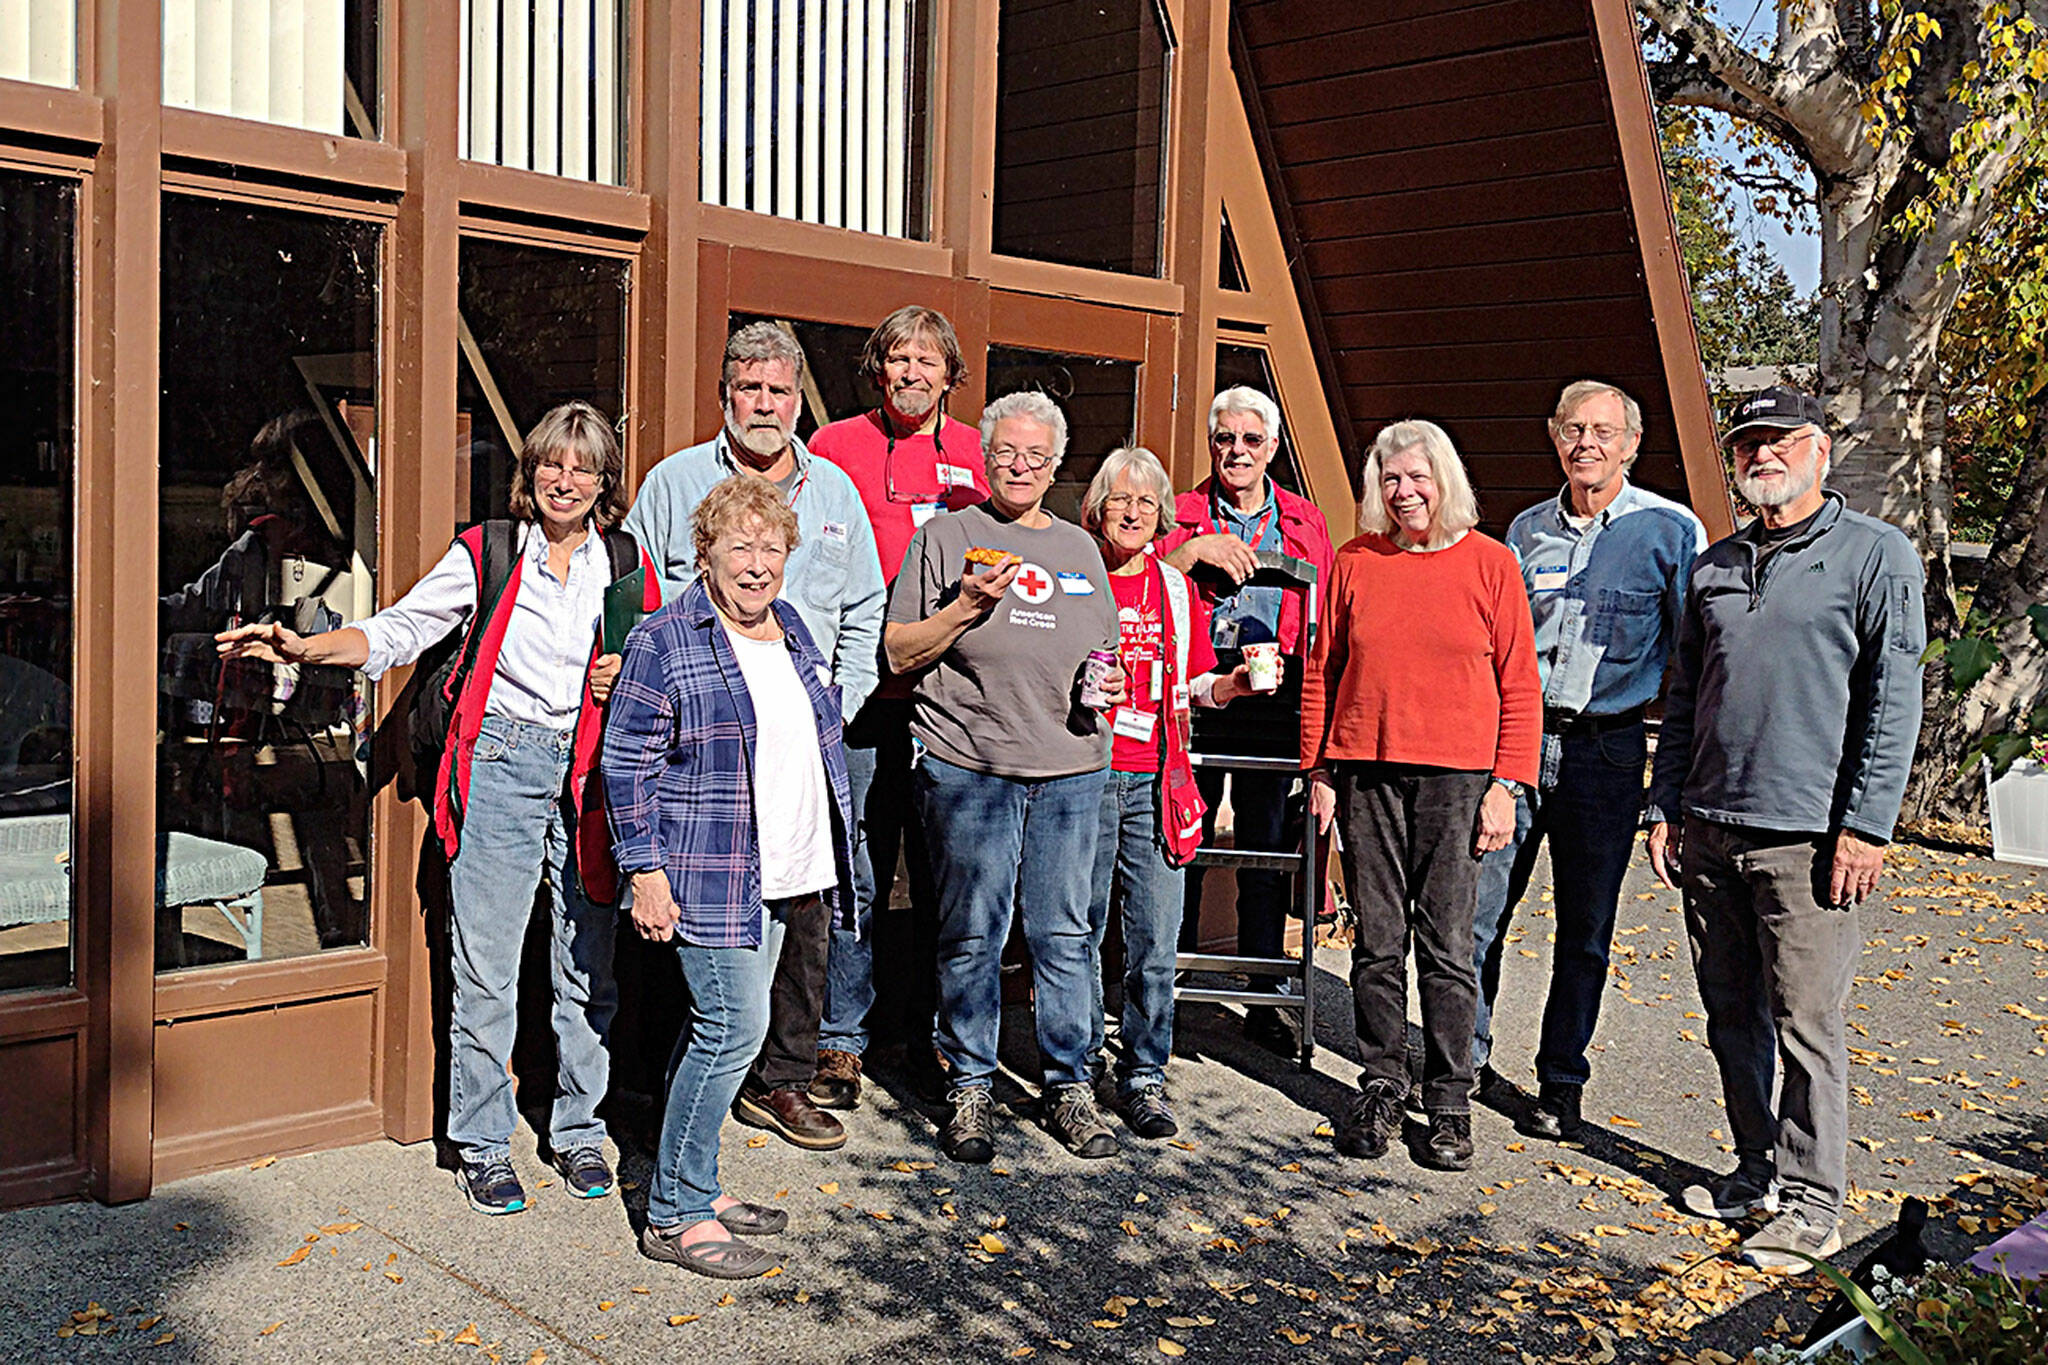 Photo courtesy of Jean Pratschner/ Volunteers with Clallam County Red Cross installed 63 smoke alarms on Oct. 15 in Dungeness Meadows as part of the “Sound the Alarm” program to install free alarms and provide safety advice for fires and earthquakes.